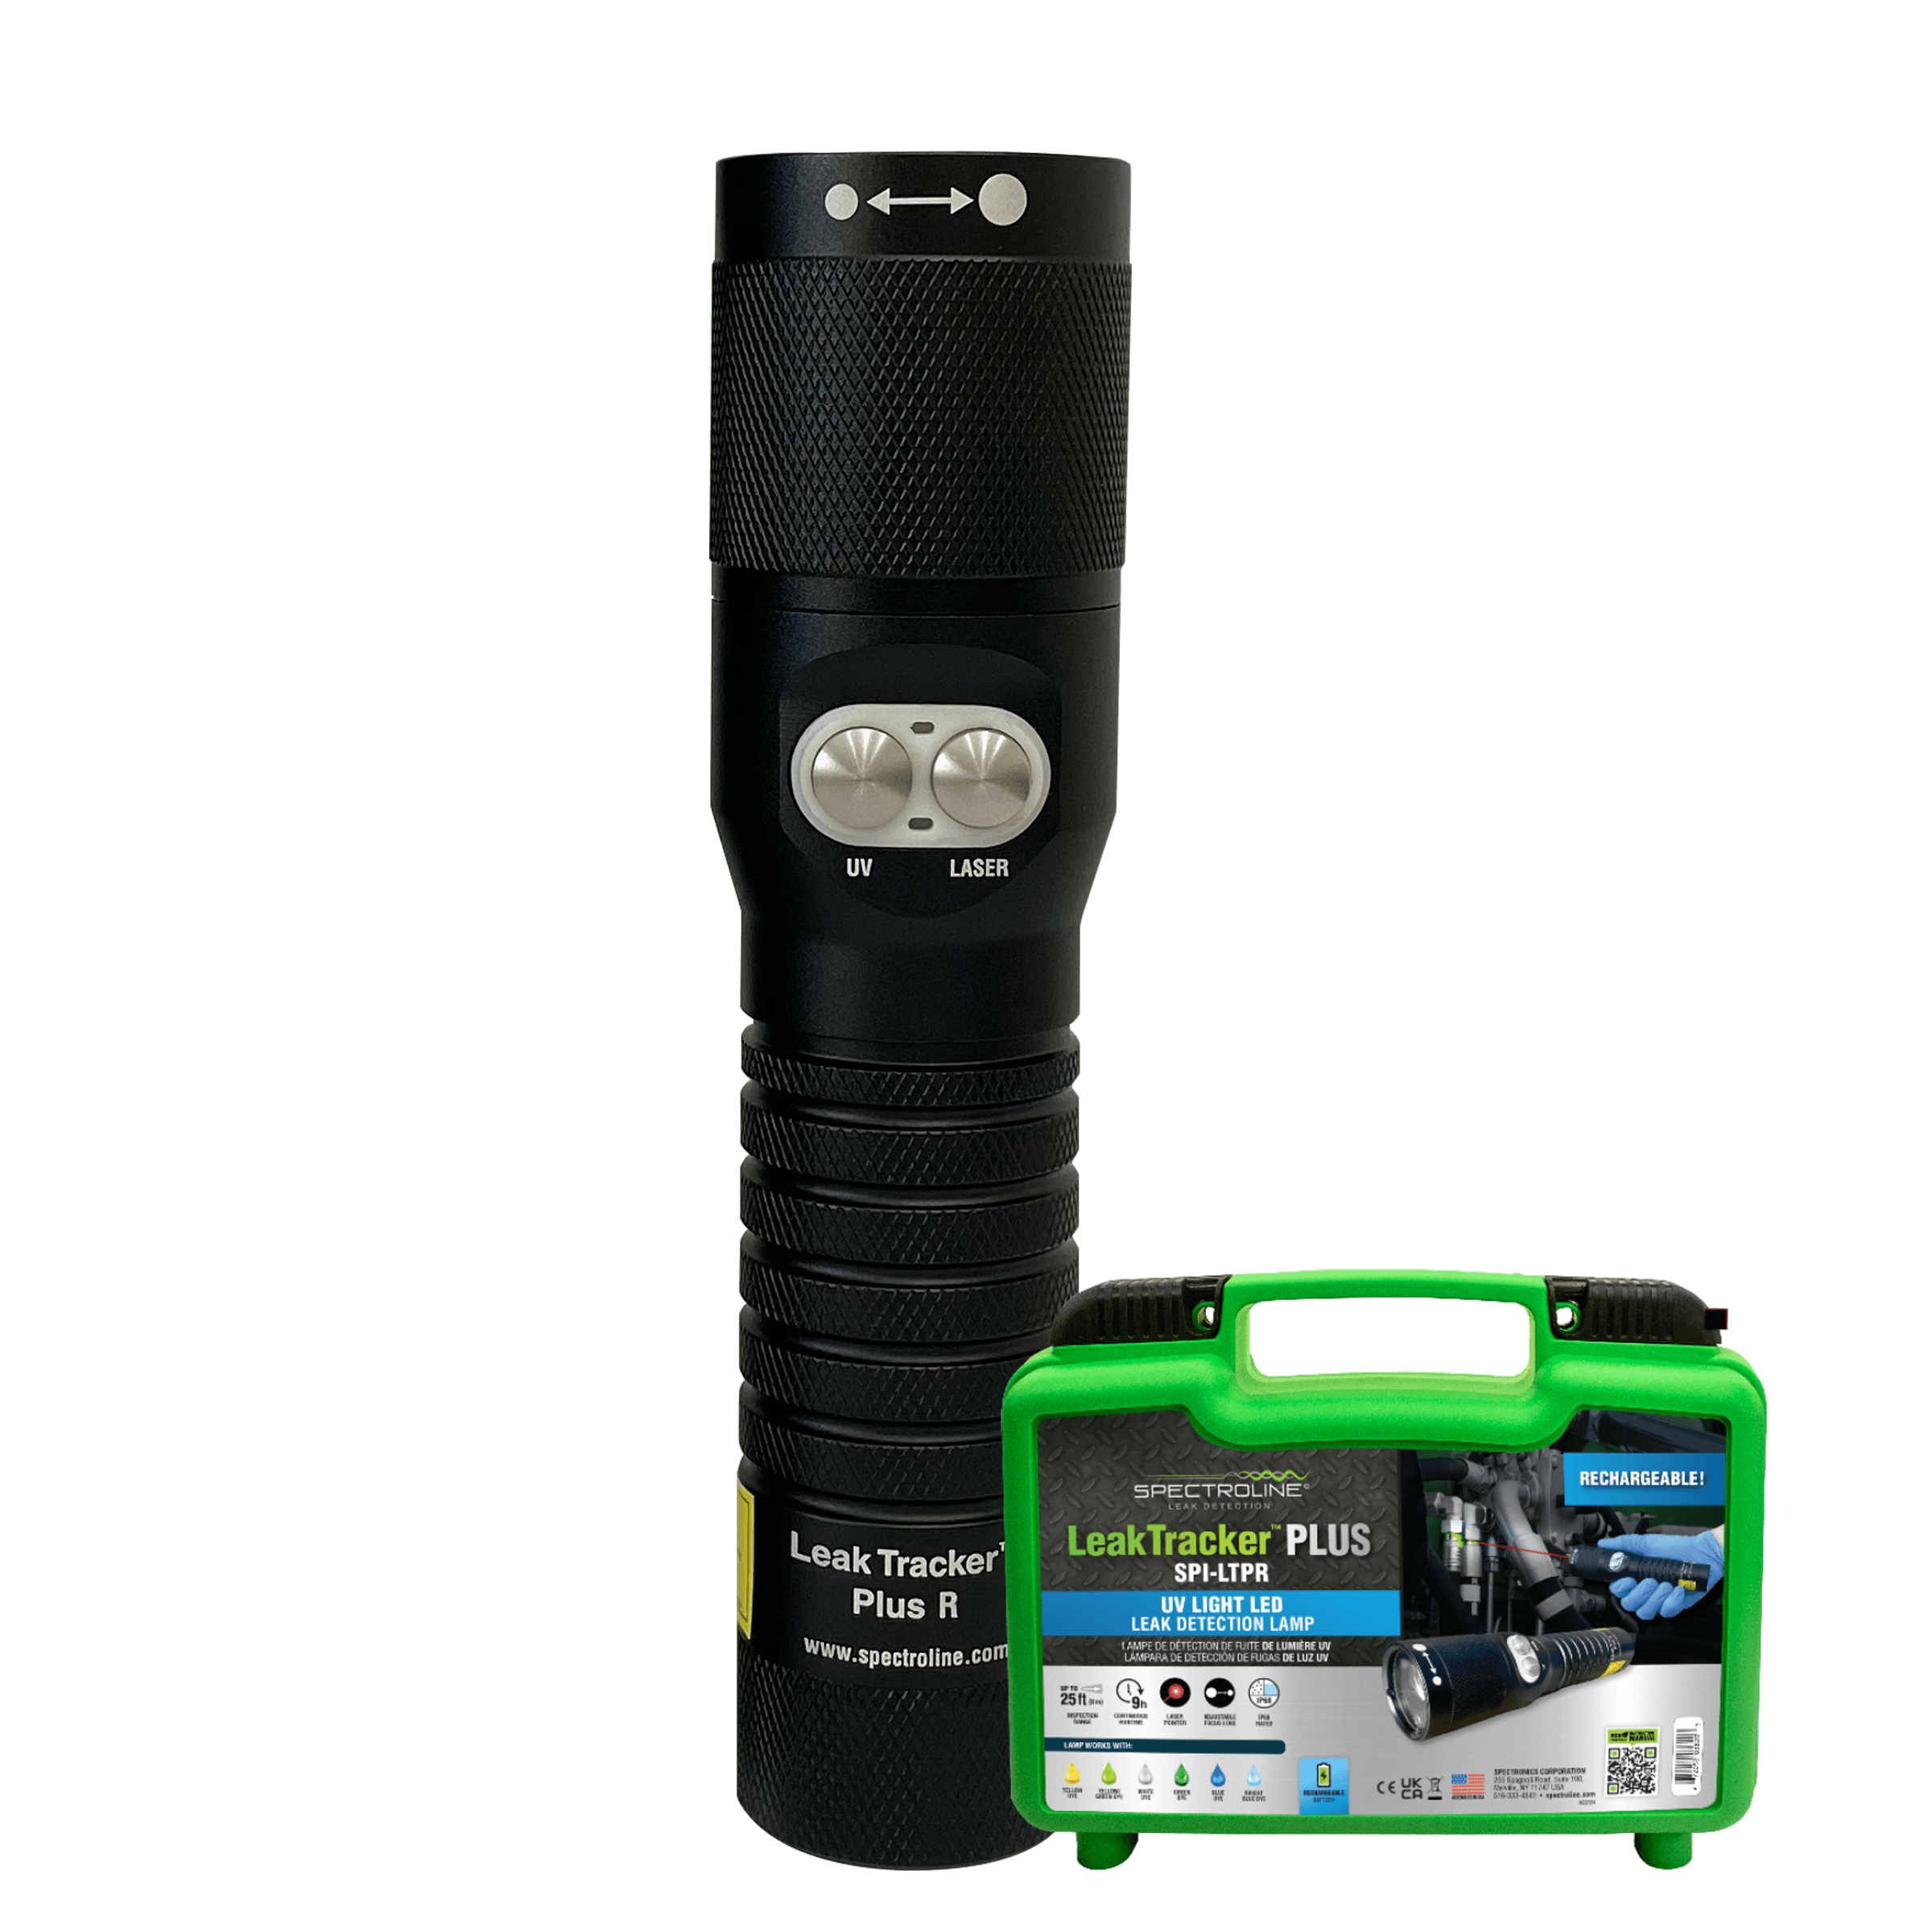 Lampe torche rechargeable Tracker Pro Led